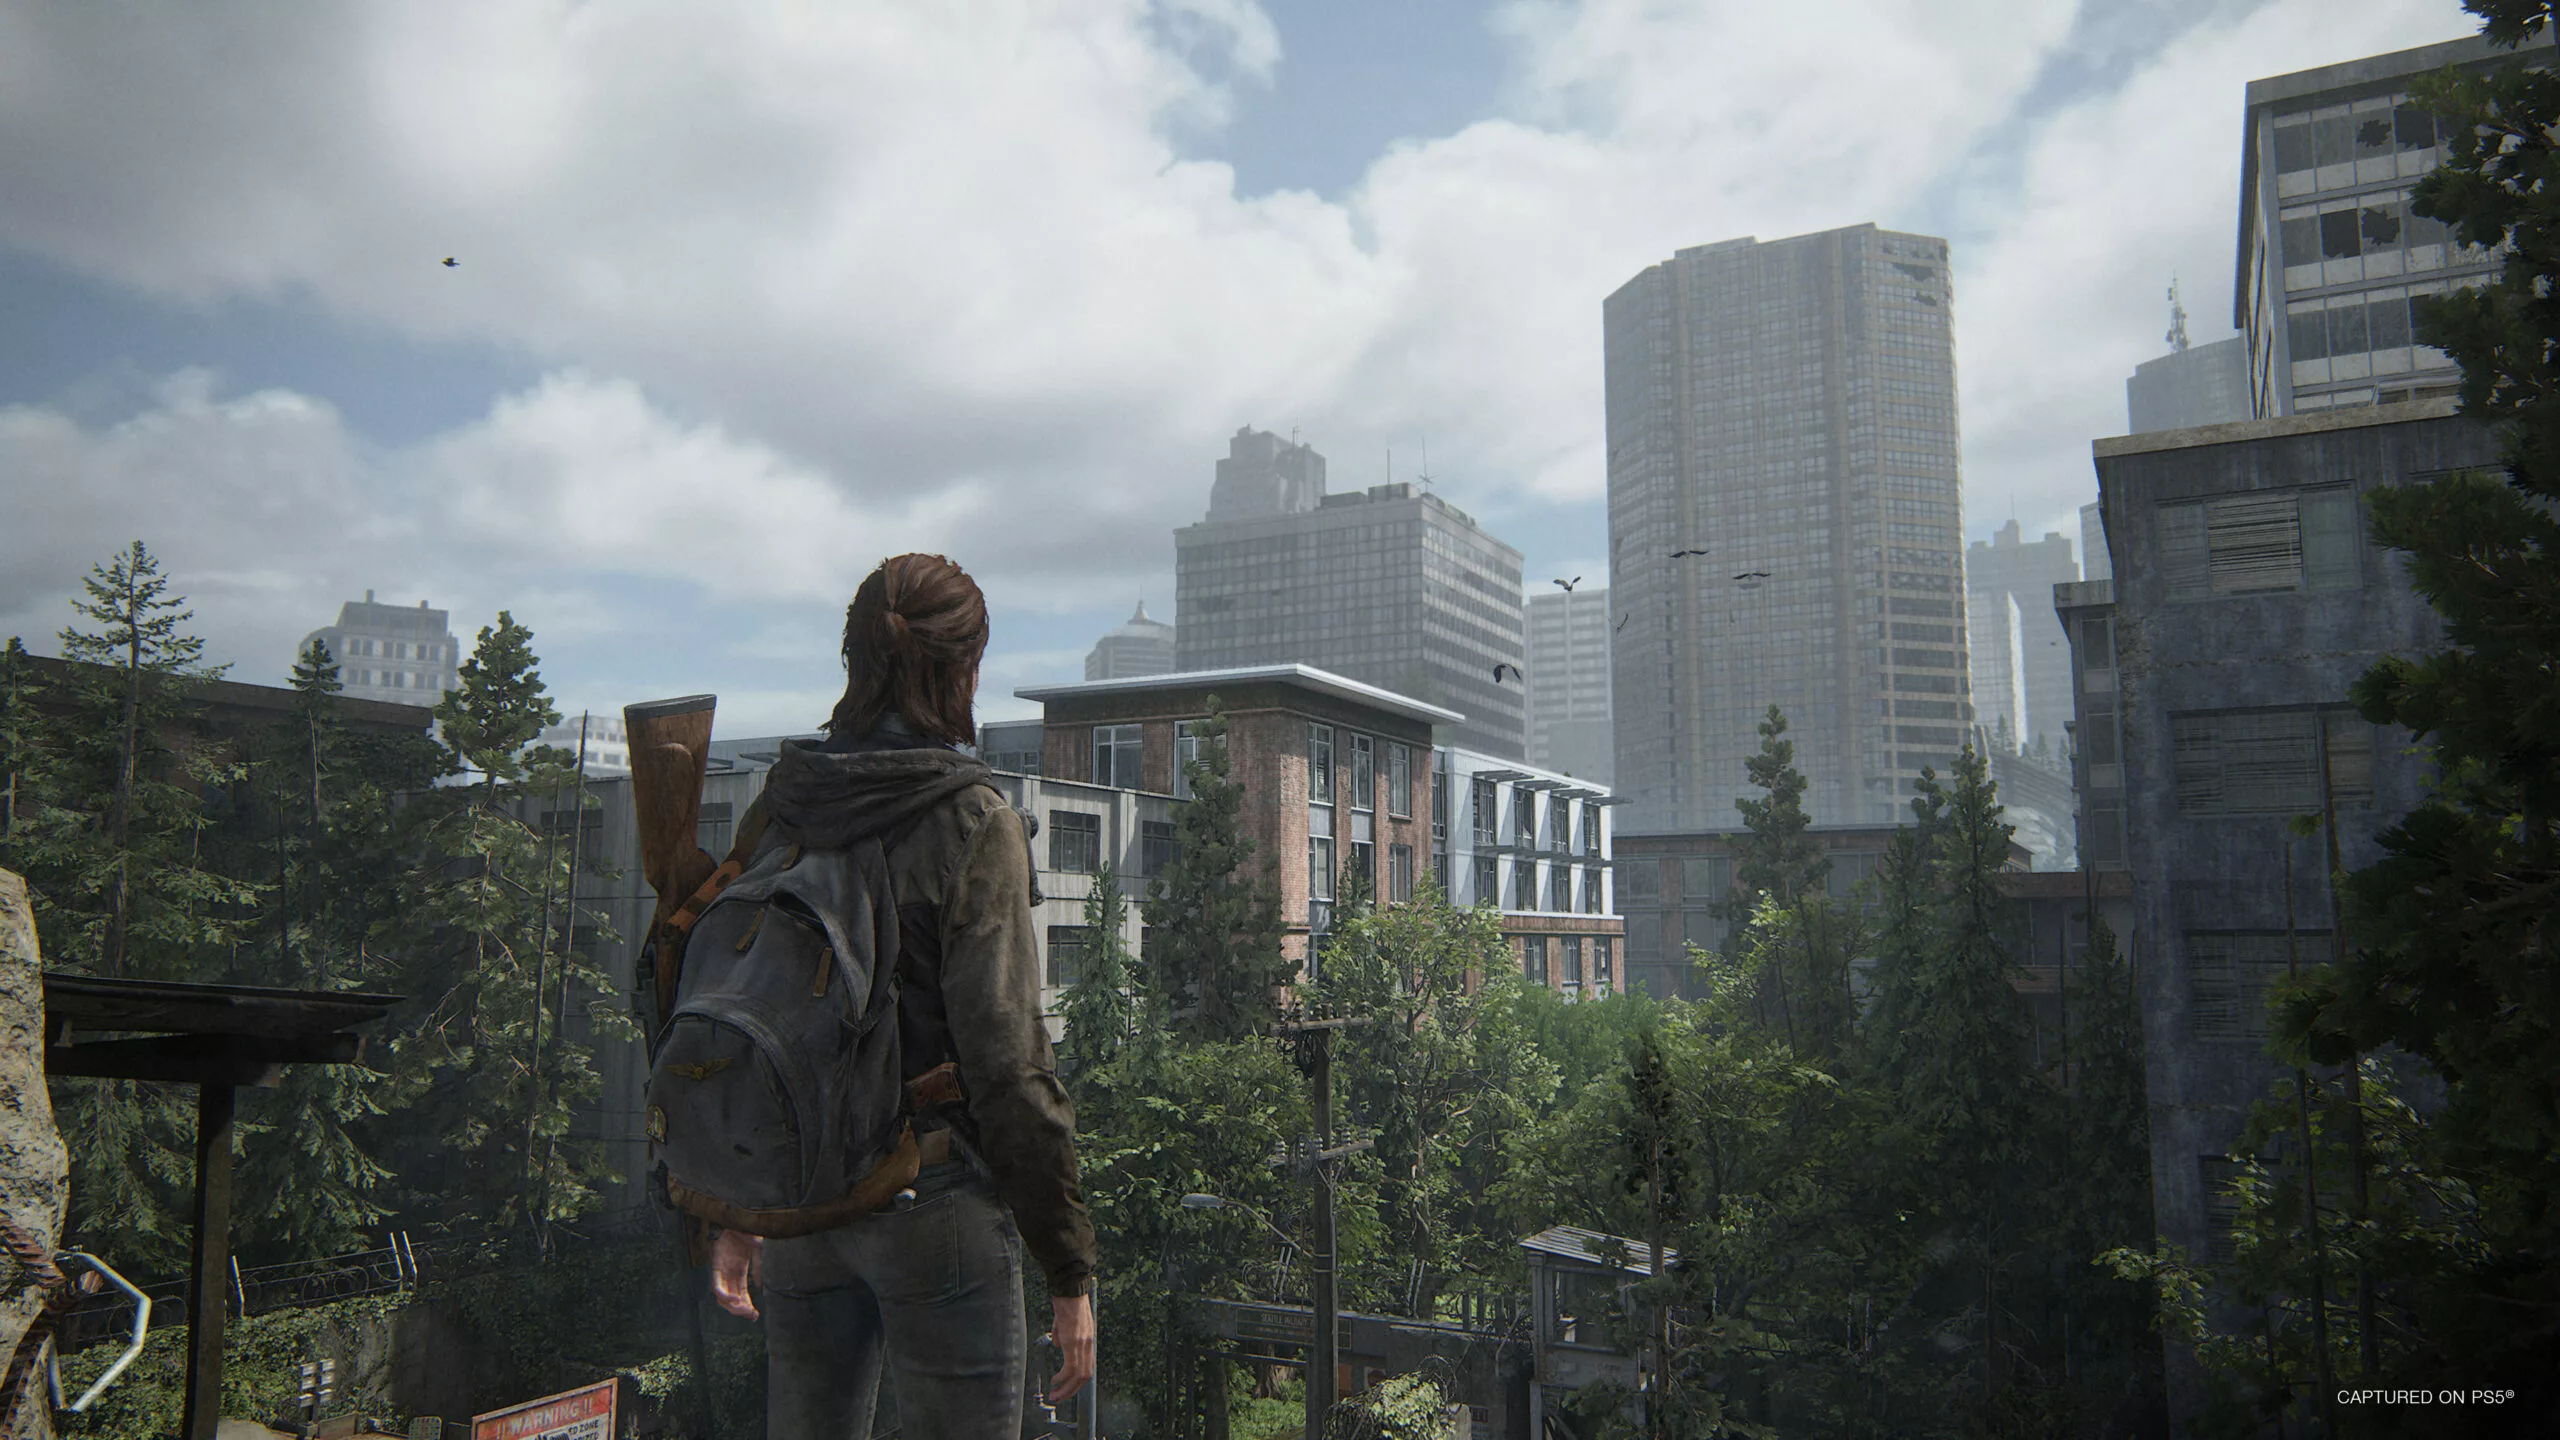 The Last of Us Part II Remastered Review